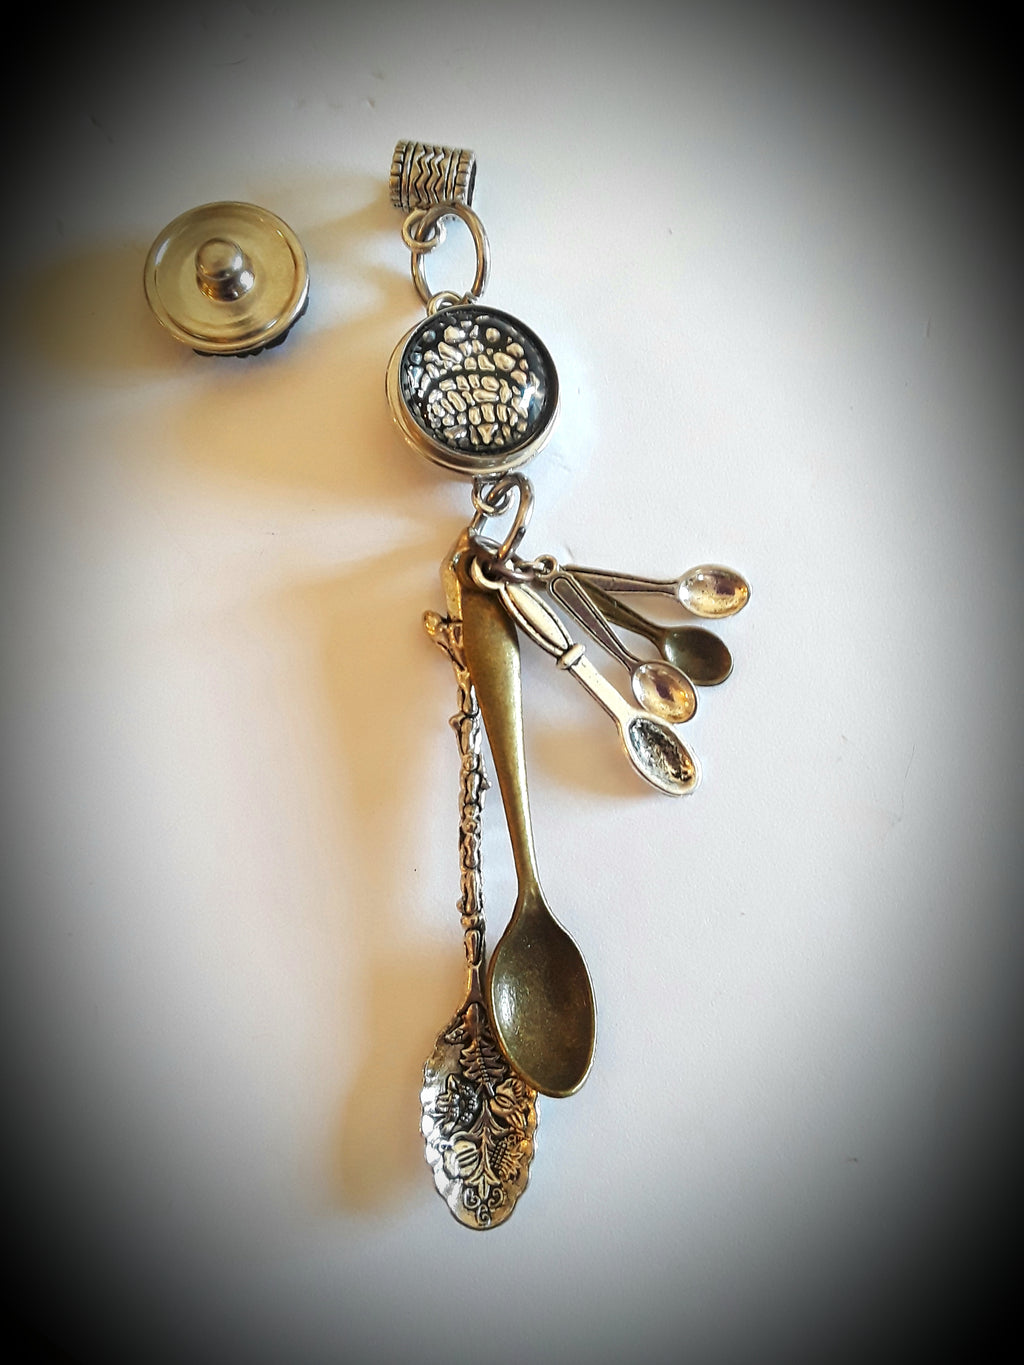 18mm noosa base pendant with spoons